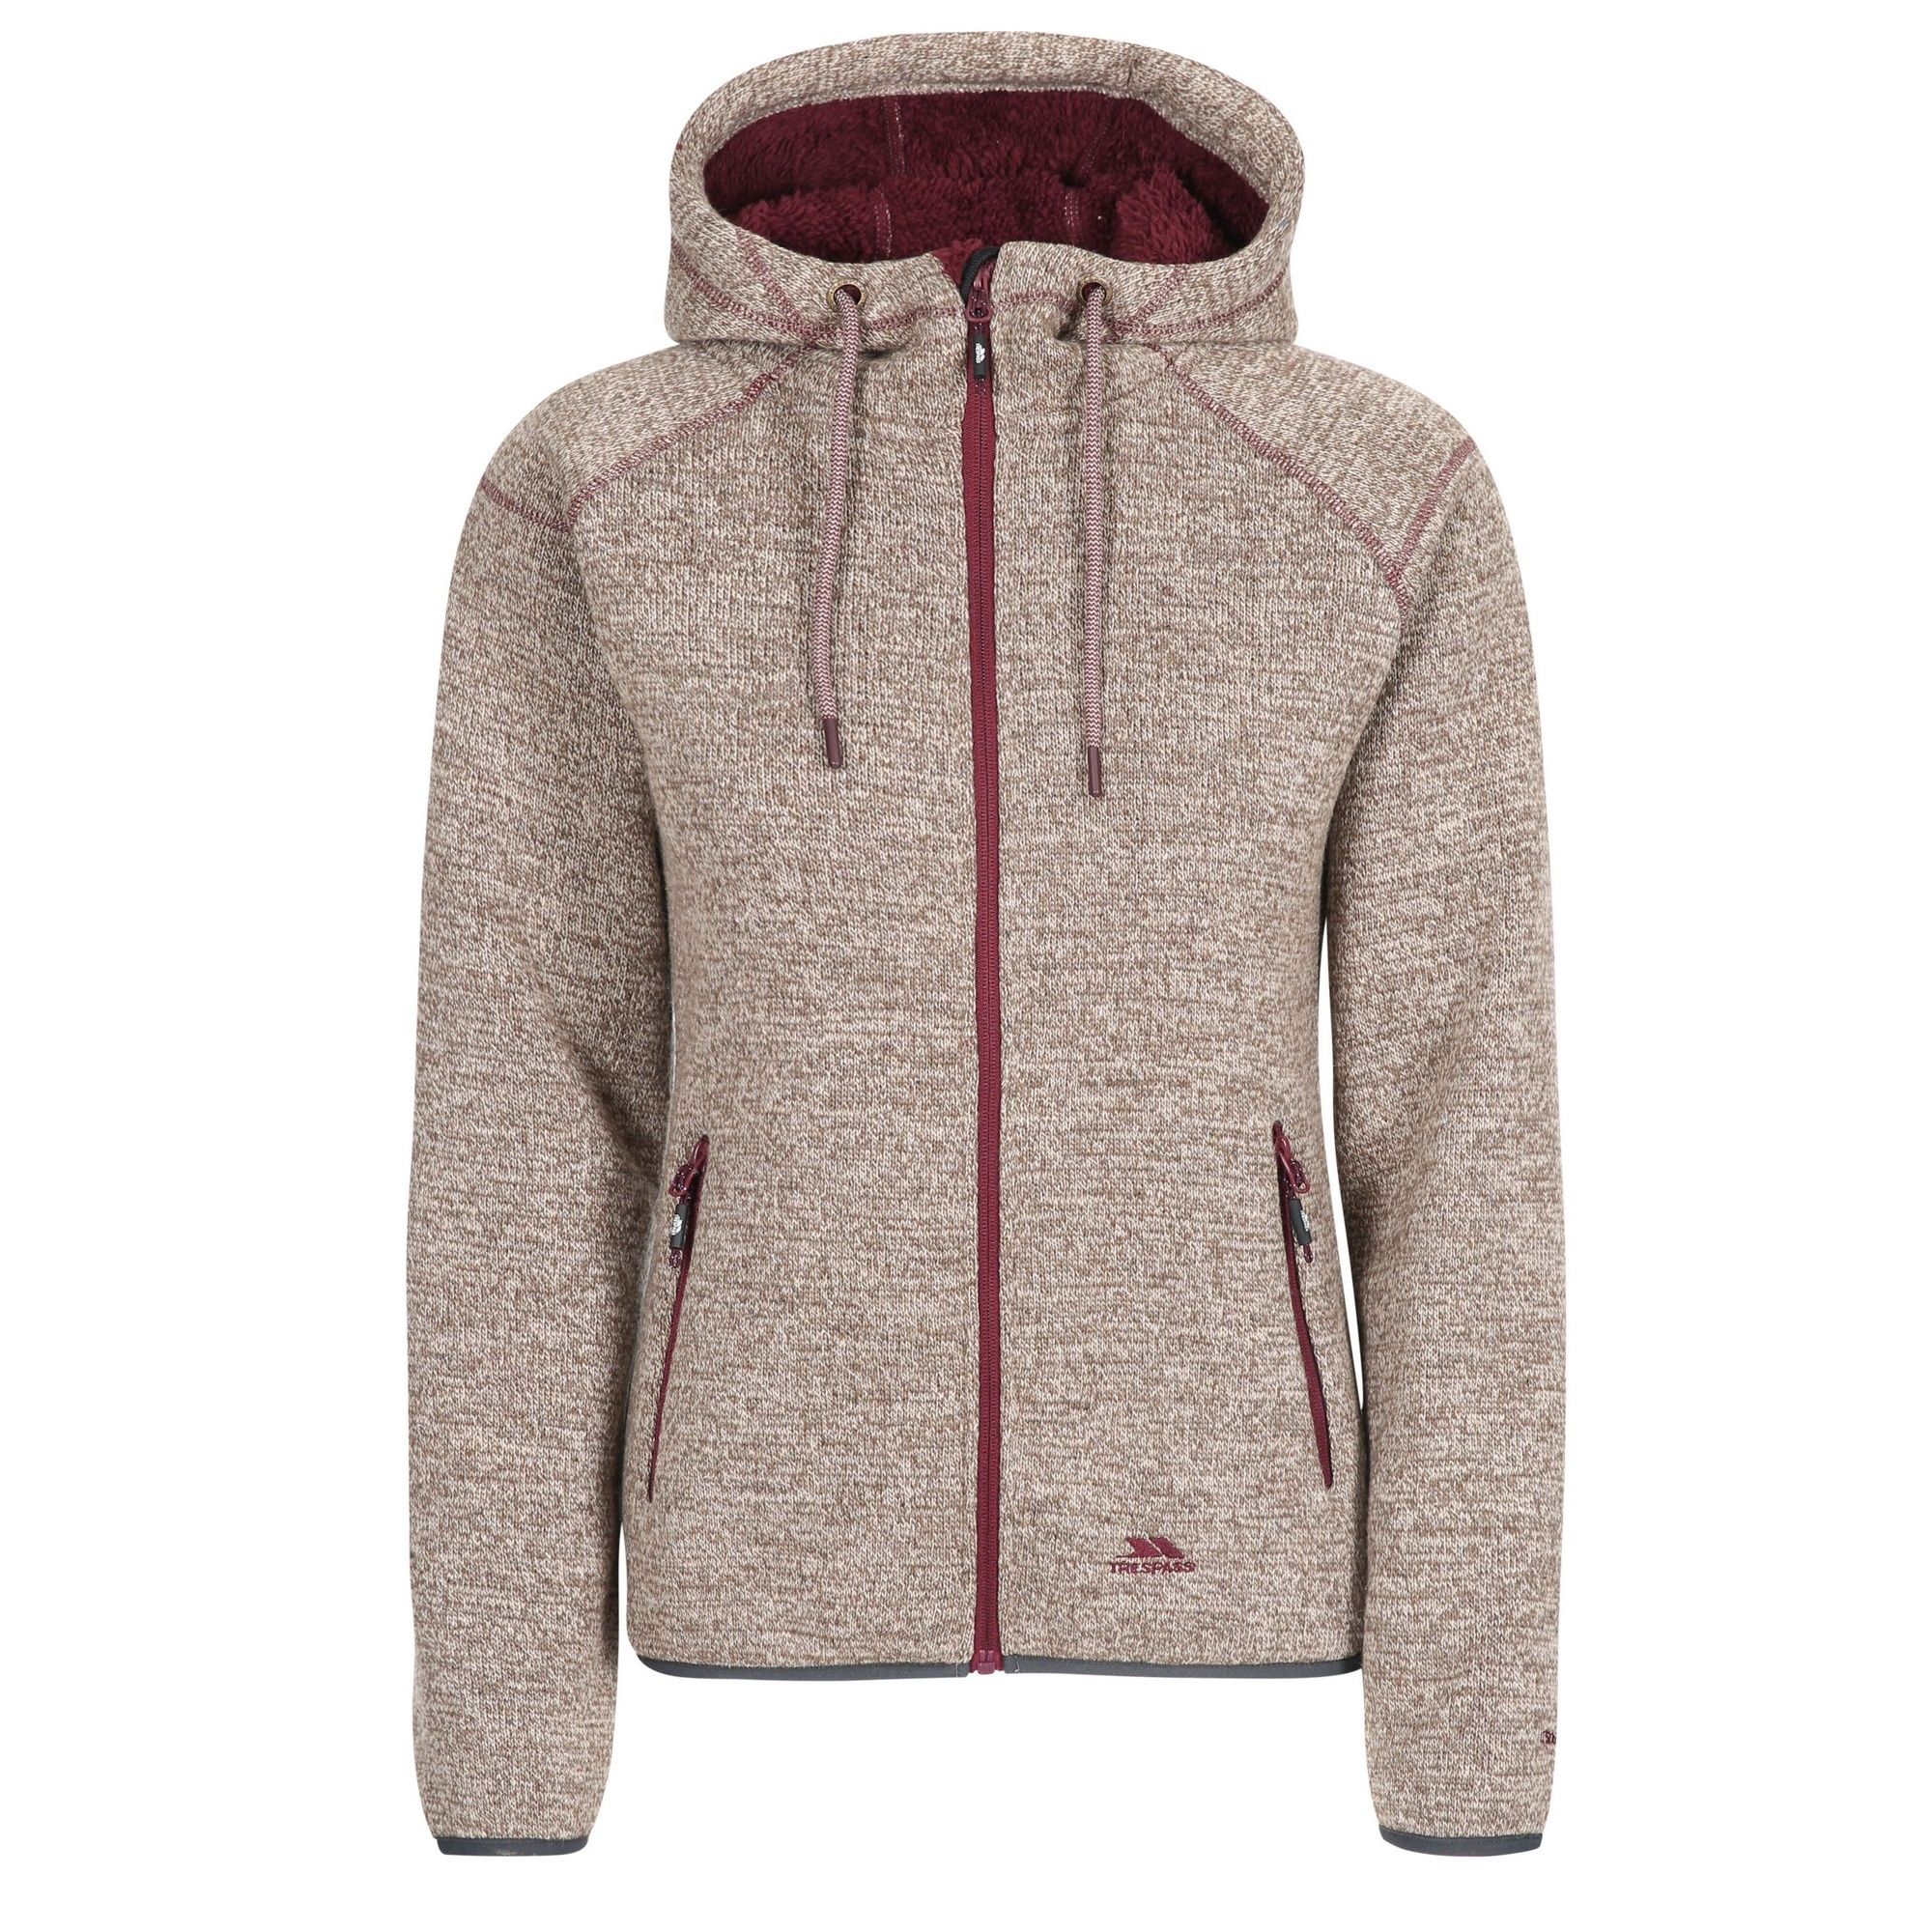 Bonded knitted marl fleece. Long haired contrast fleece at back. Full front zip. 2 zipped hand pockets. Grown on hood. Stretch binding at cuffs and hem. Airtrap. 500gsm. 70% Polyester, 30% Acrylic. Trespass Womens Chest Sizing (approx): XS/8 - 32in/81cm, S/10 - 34in/86cm, M/12 - 36in/91.4cm, L/14 - 38in/96.5cm, XL/16 - 40in/101.5cm, XXL/18 - 42in/106.5cm.